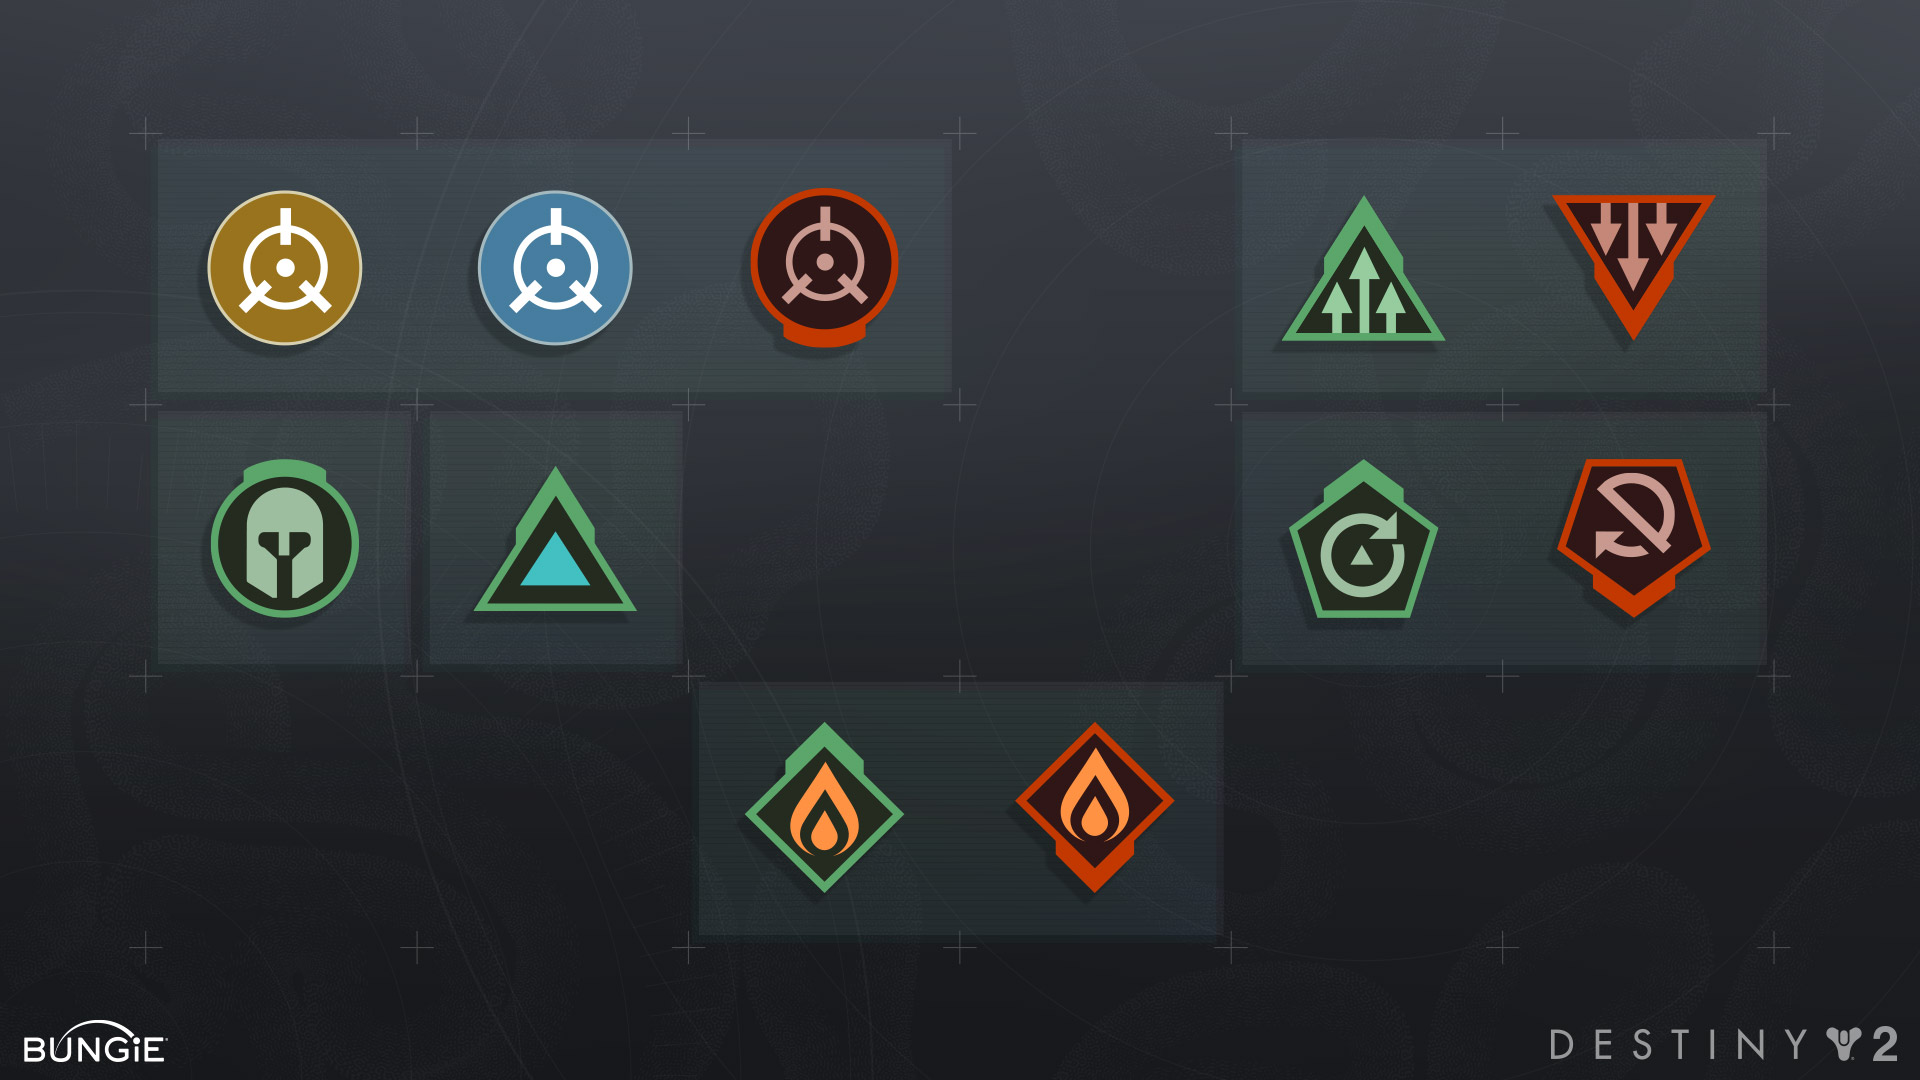 New buff icons